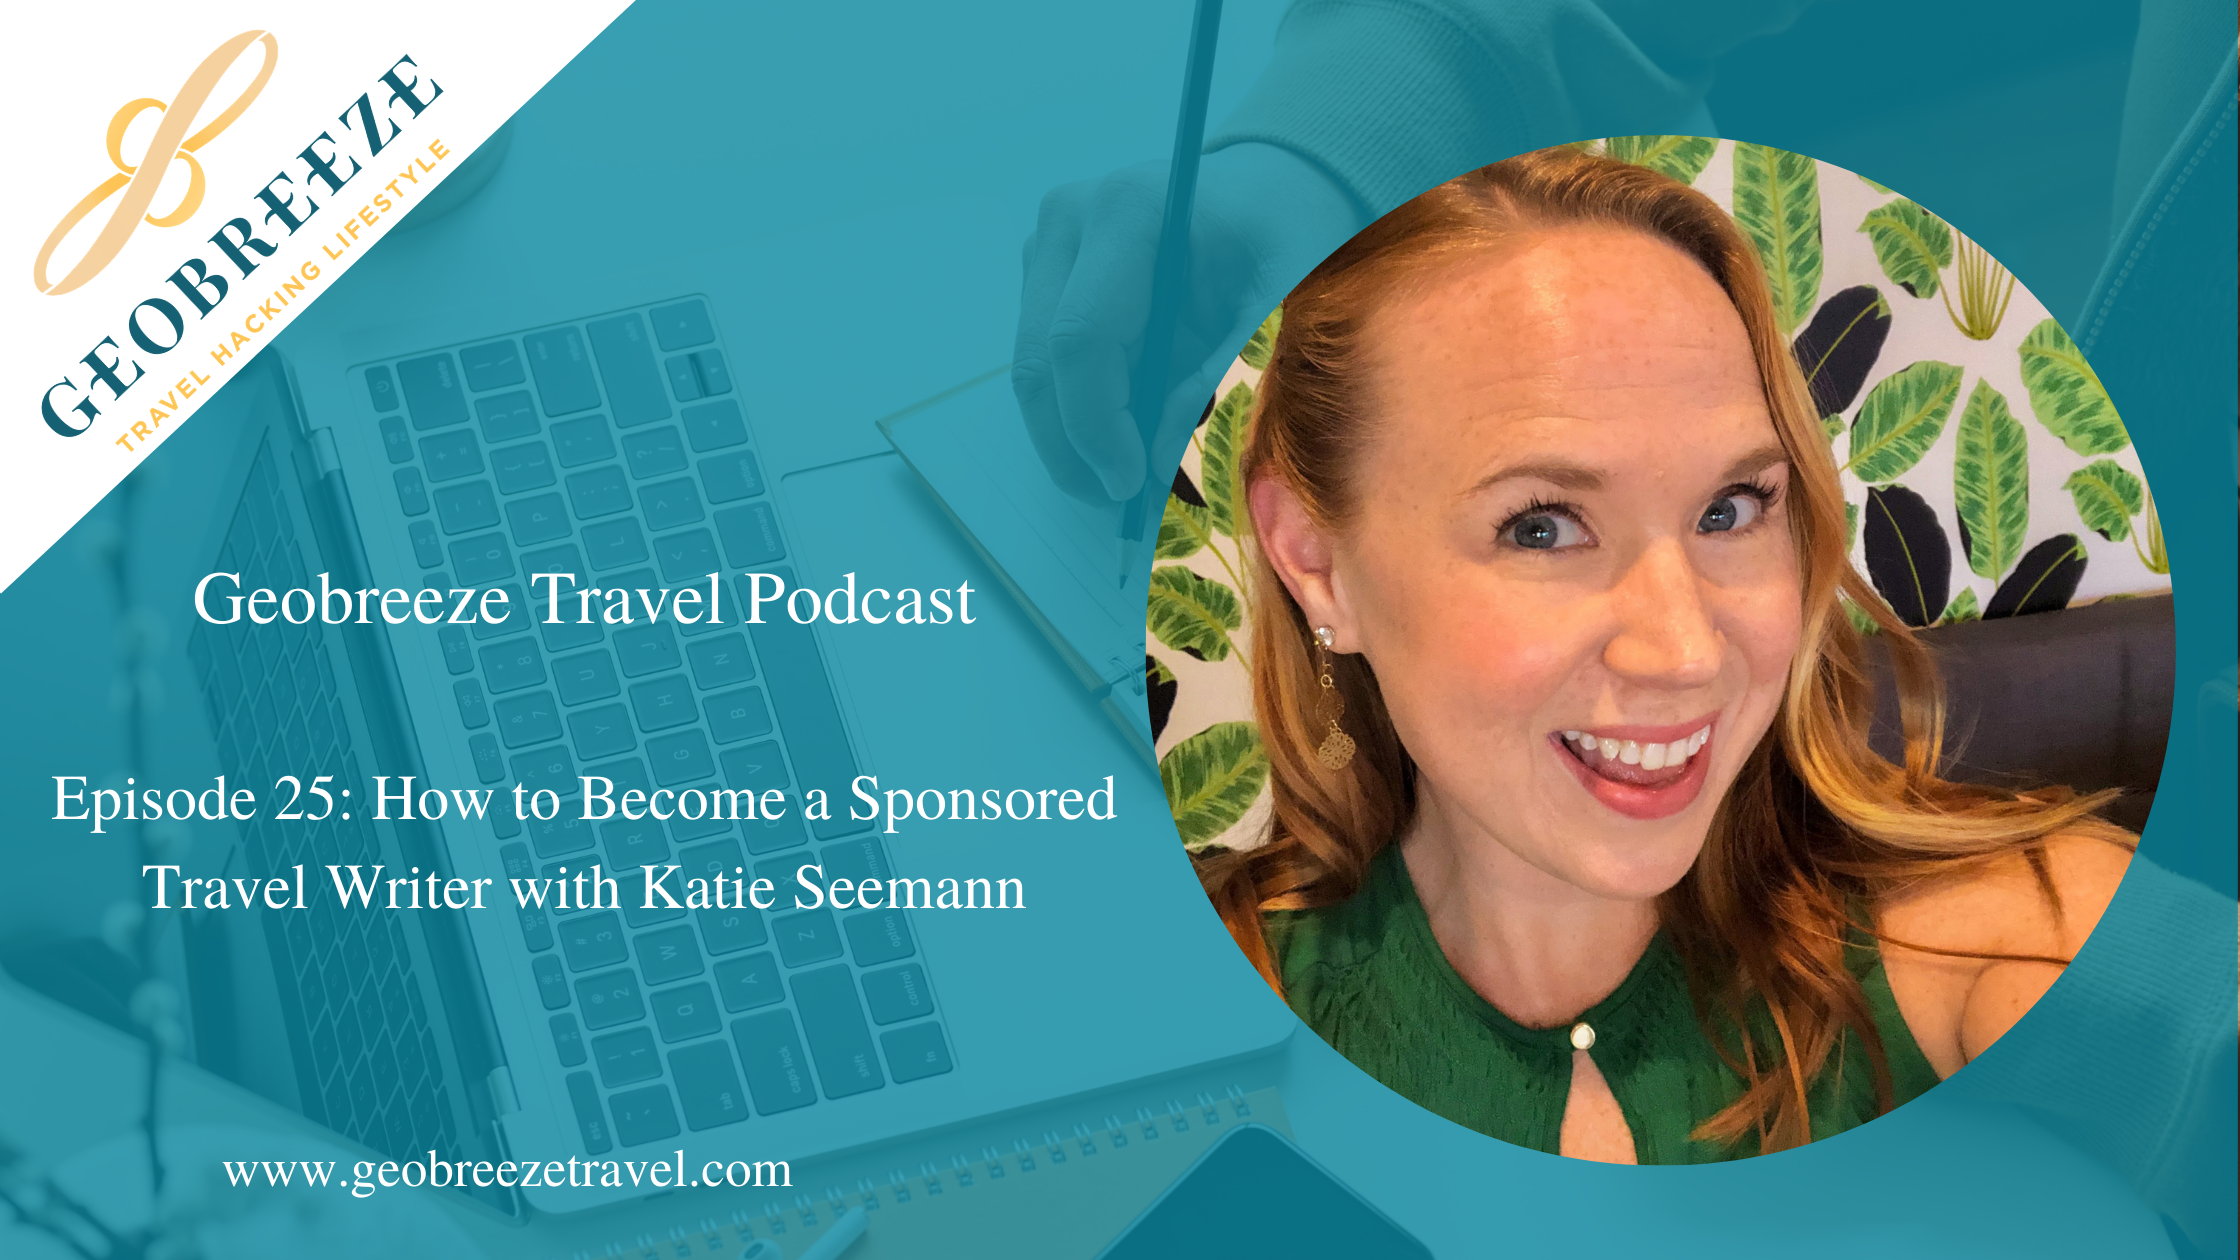 Episode 25: How to Become a Sponsored Travel Writer with Katie Seemann